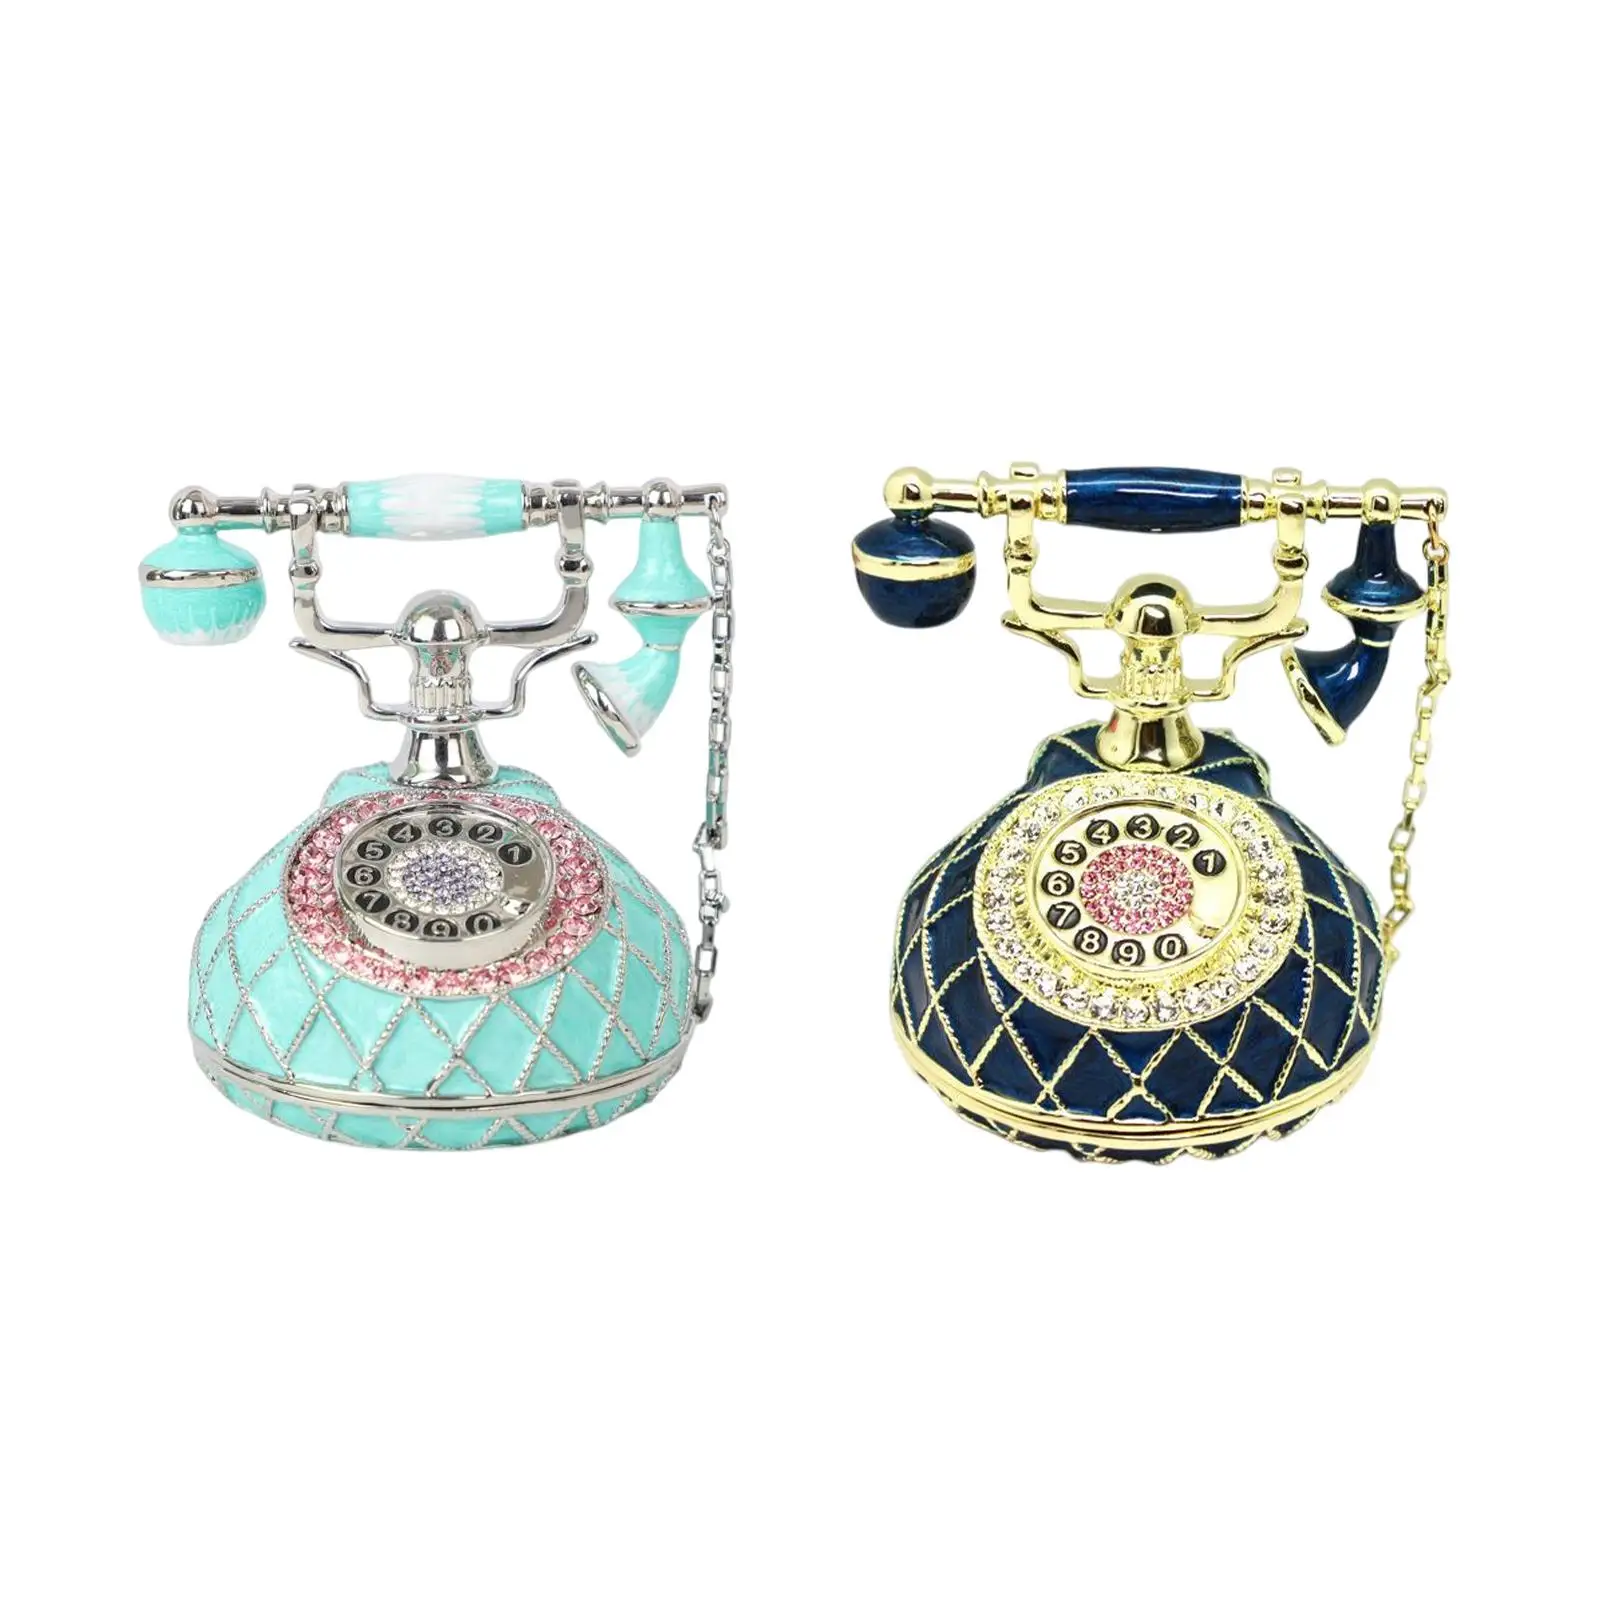 Vintage Style Telephone Statue Jewelry Trinket Box Storage Decorative Hinged Decoration Case for Necklace Rings Watch Bracelet